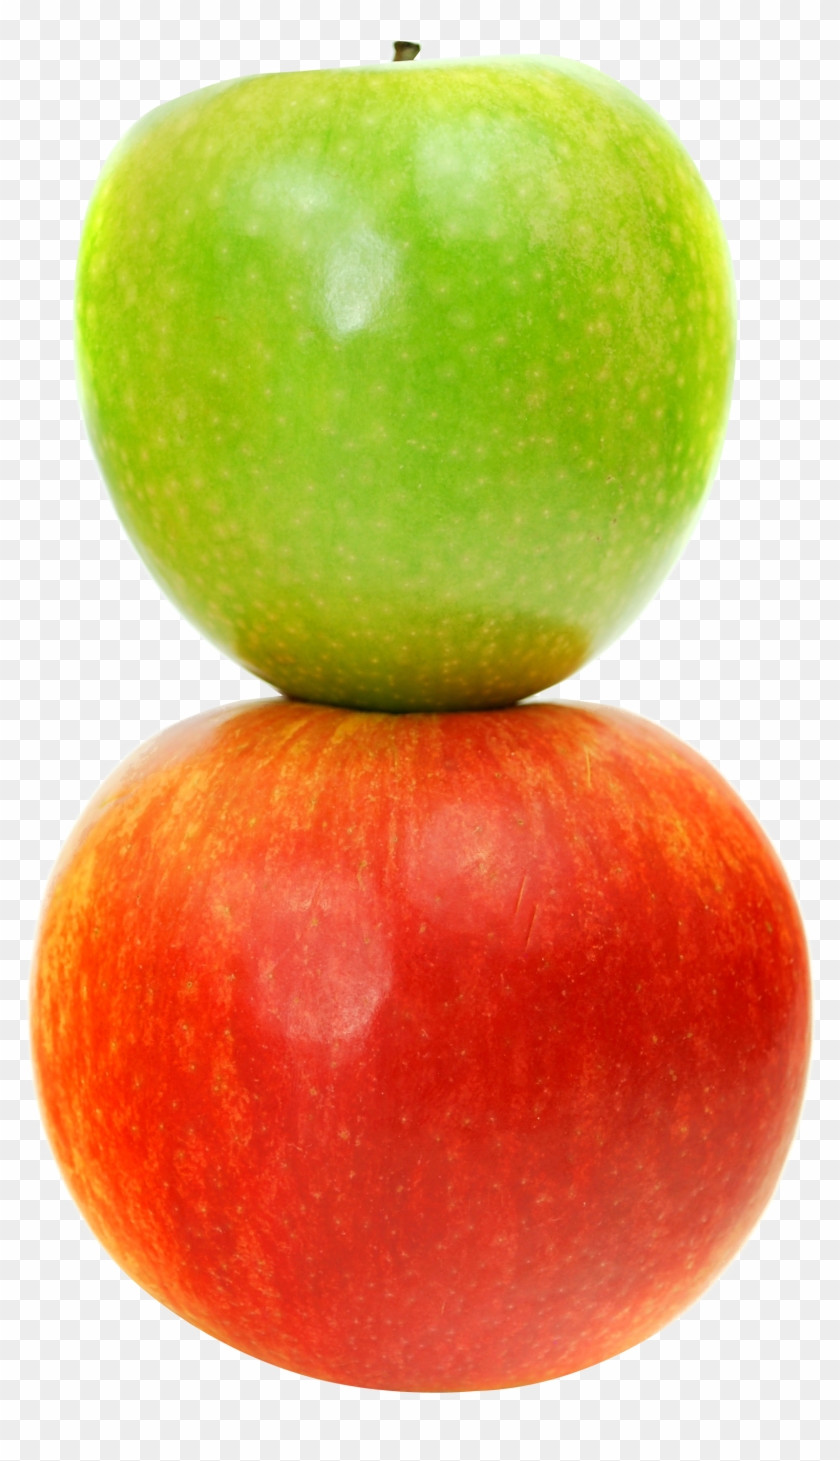 Double Apples Png - Double Apple Png Clipart #372818